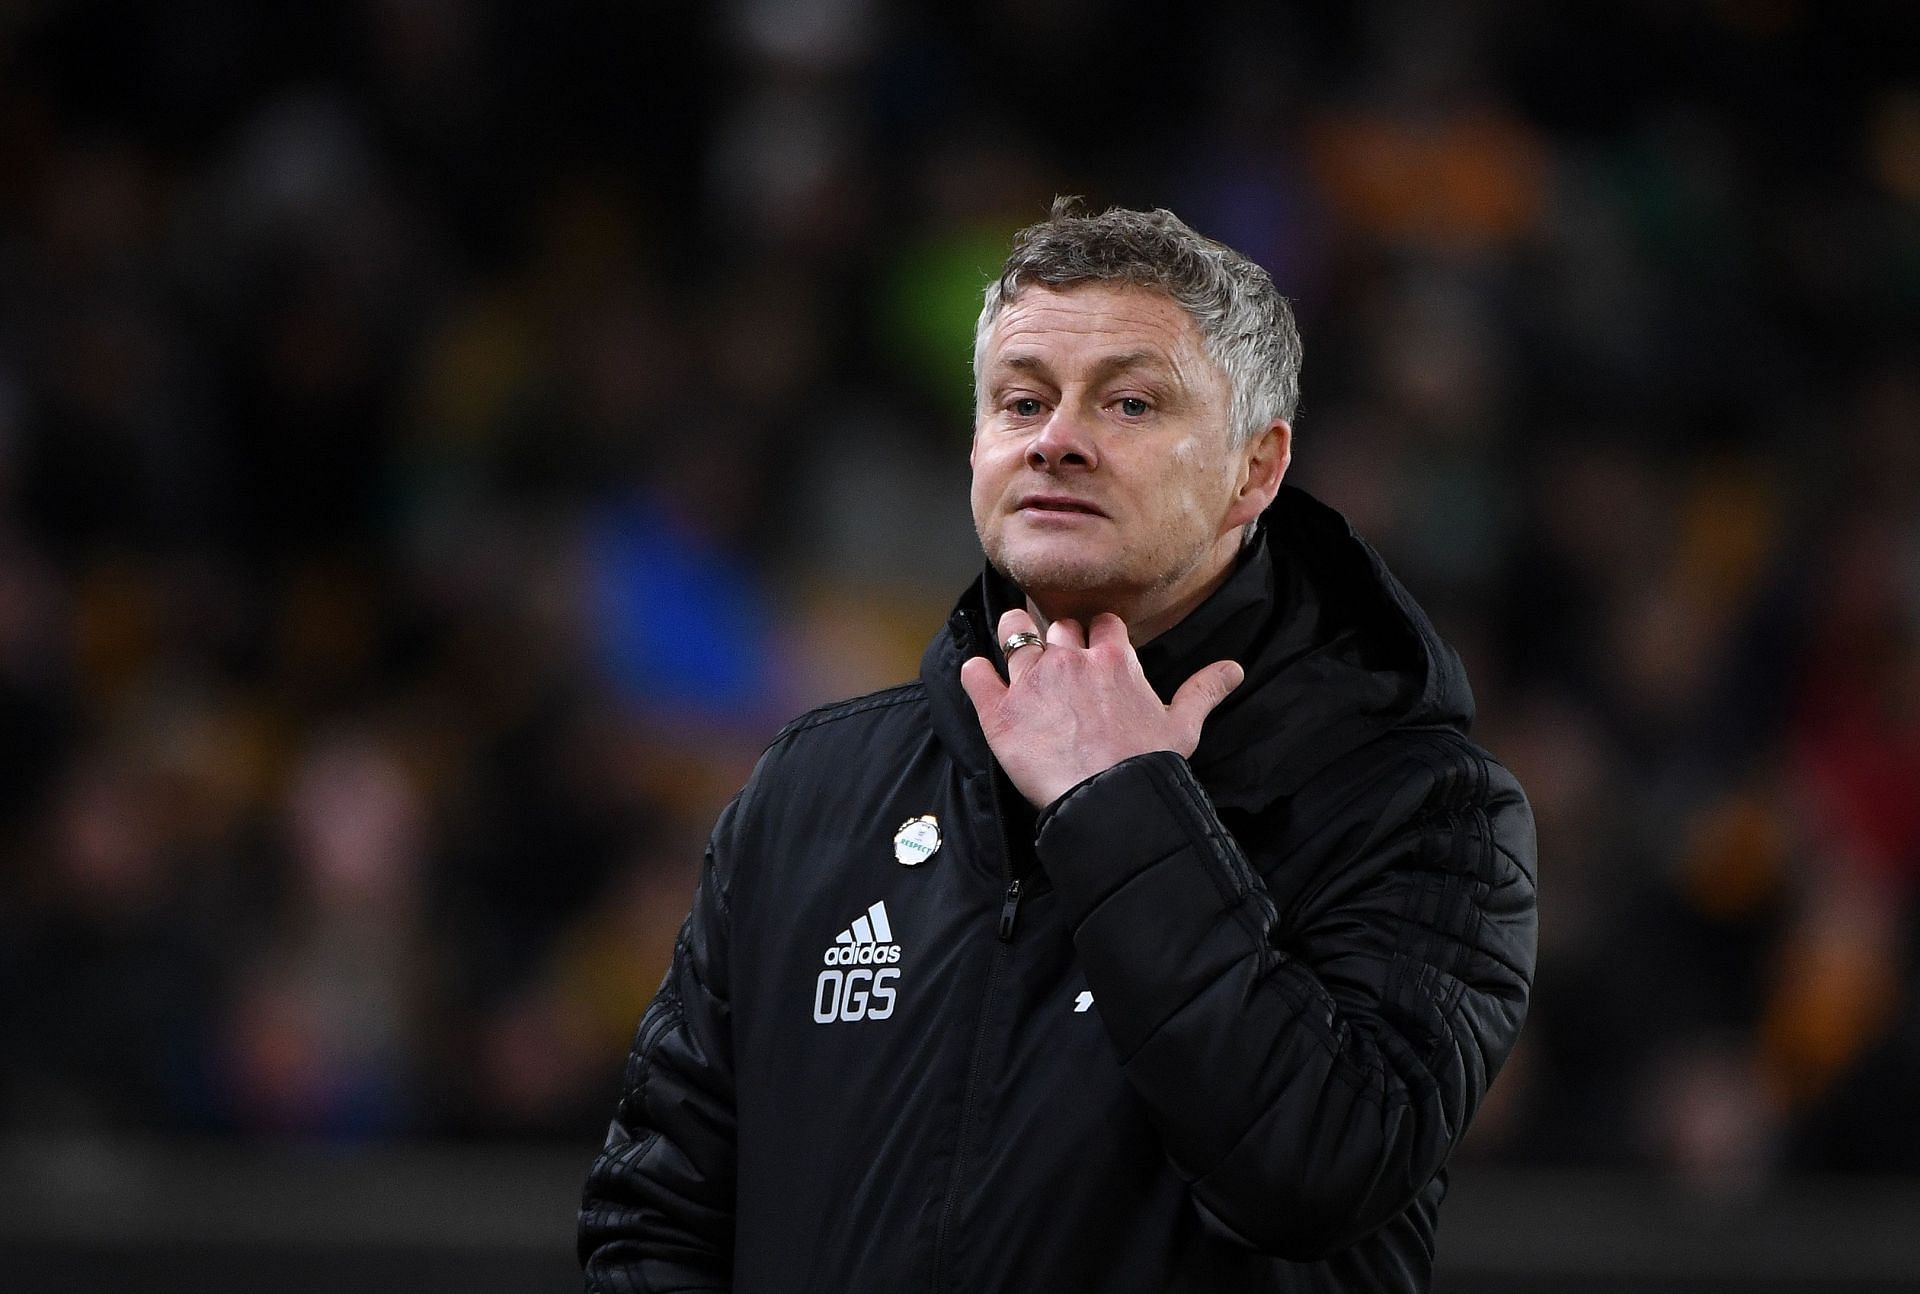 Ole Gunnar Solskjaer is struggling to turn things around at Manchester United.